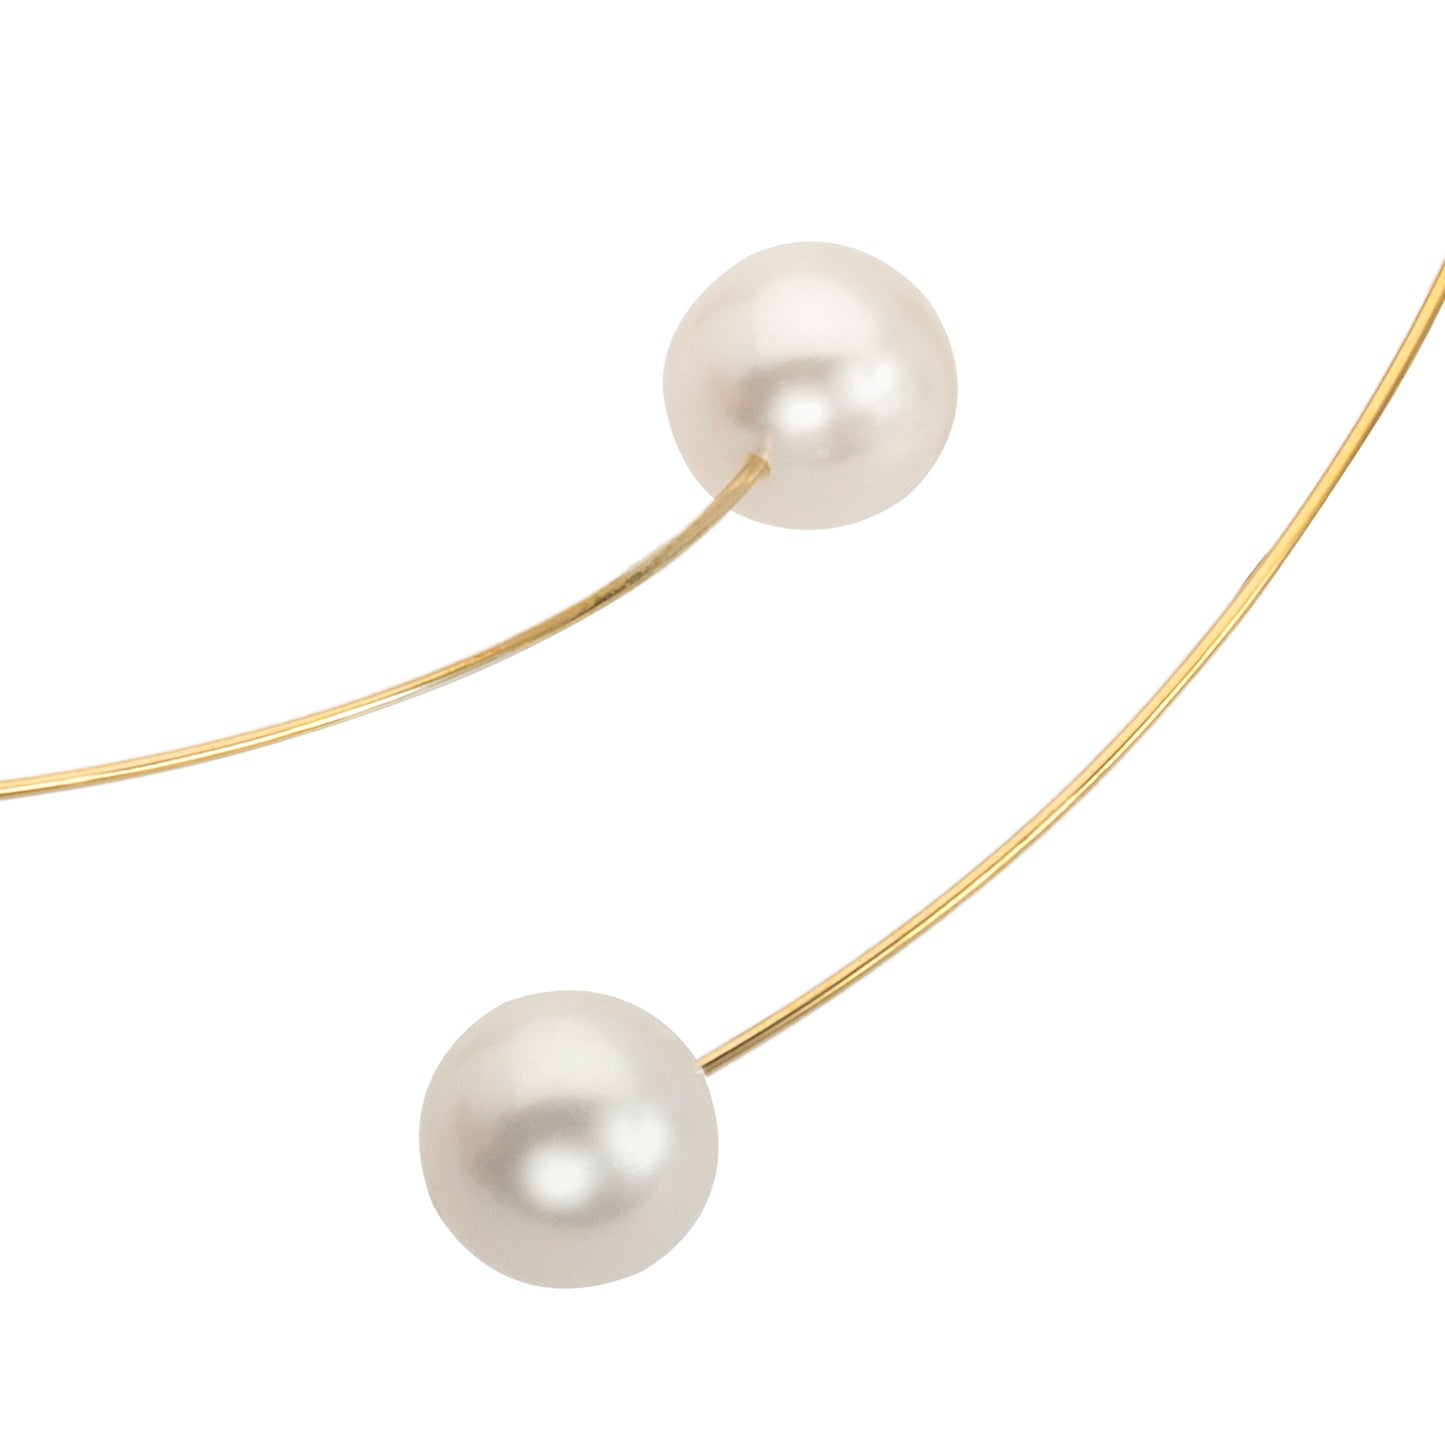 Asymmetric Neckwire with White Pearls